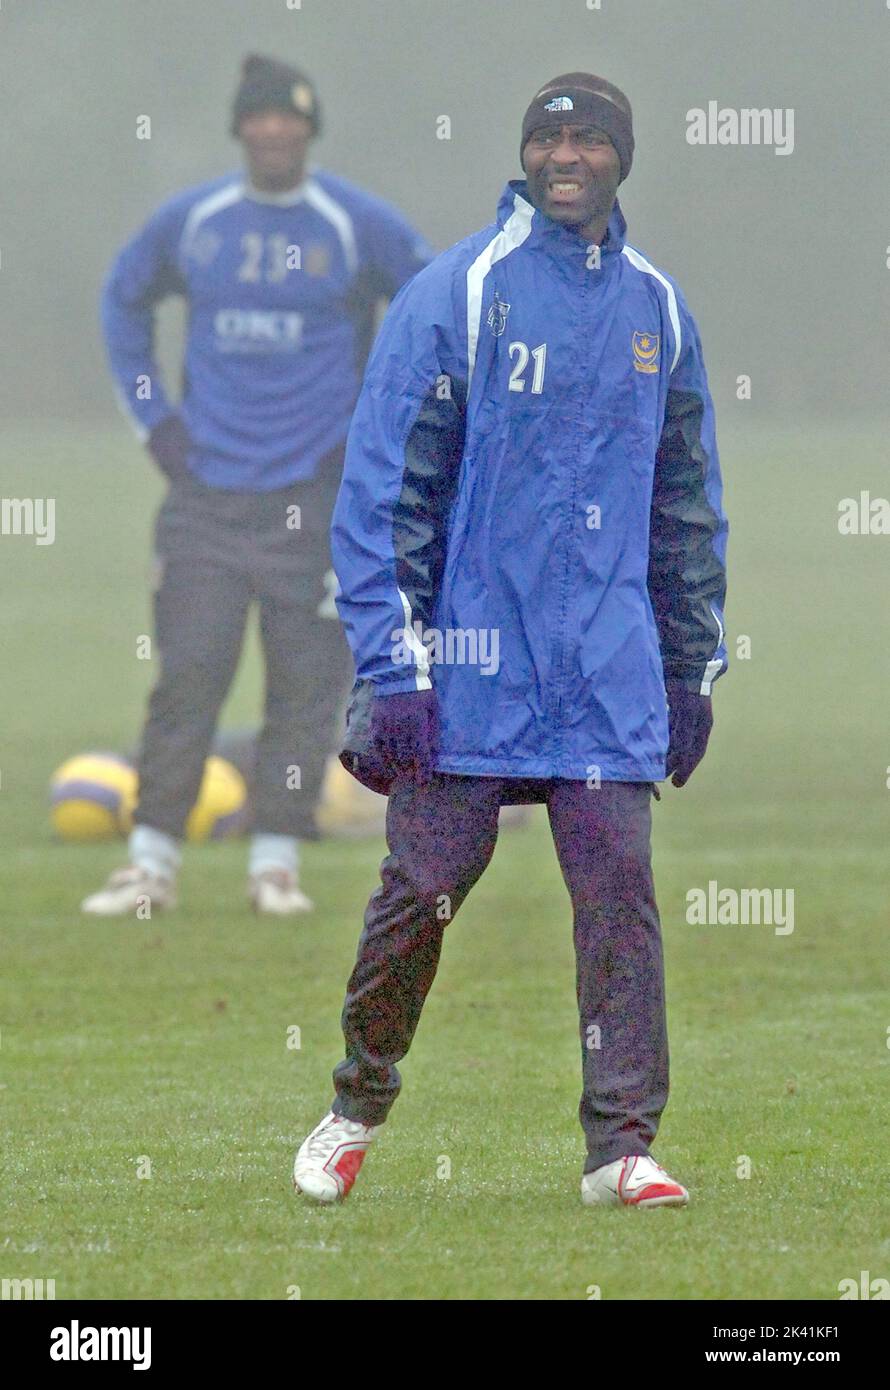 ANDREW COLE, PORTSMOUTH TRAINING 21-12-06 PIC MIKE WALKER, 2006 Stockfoto